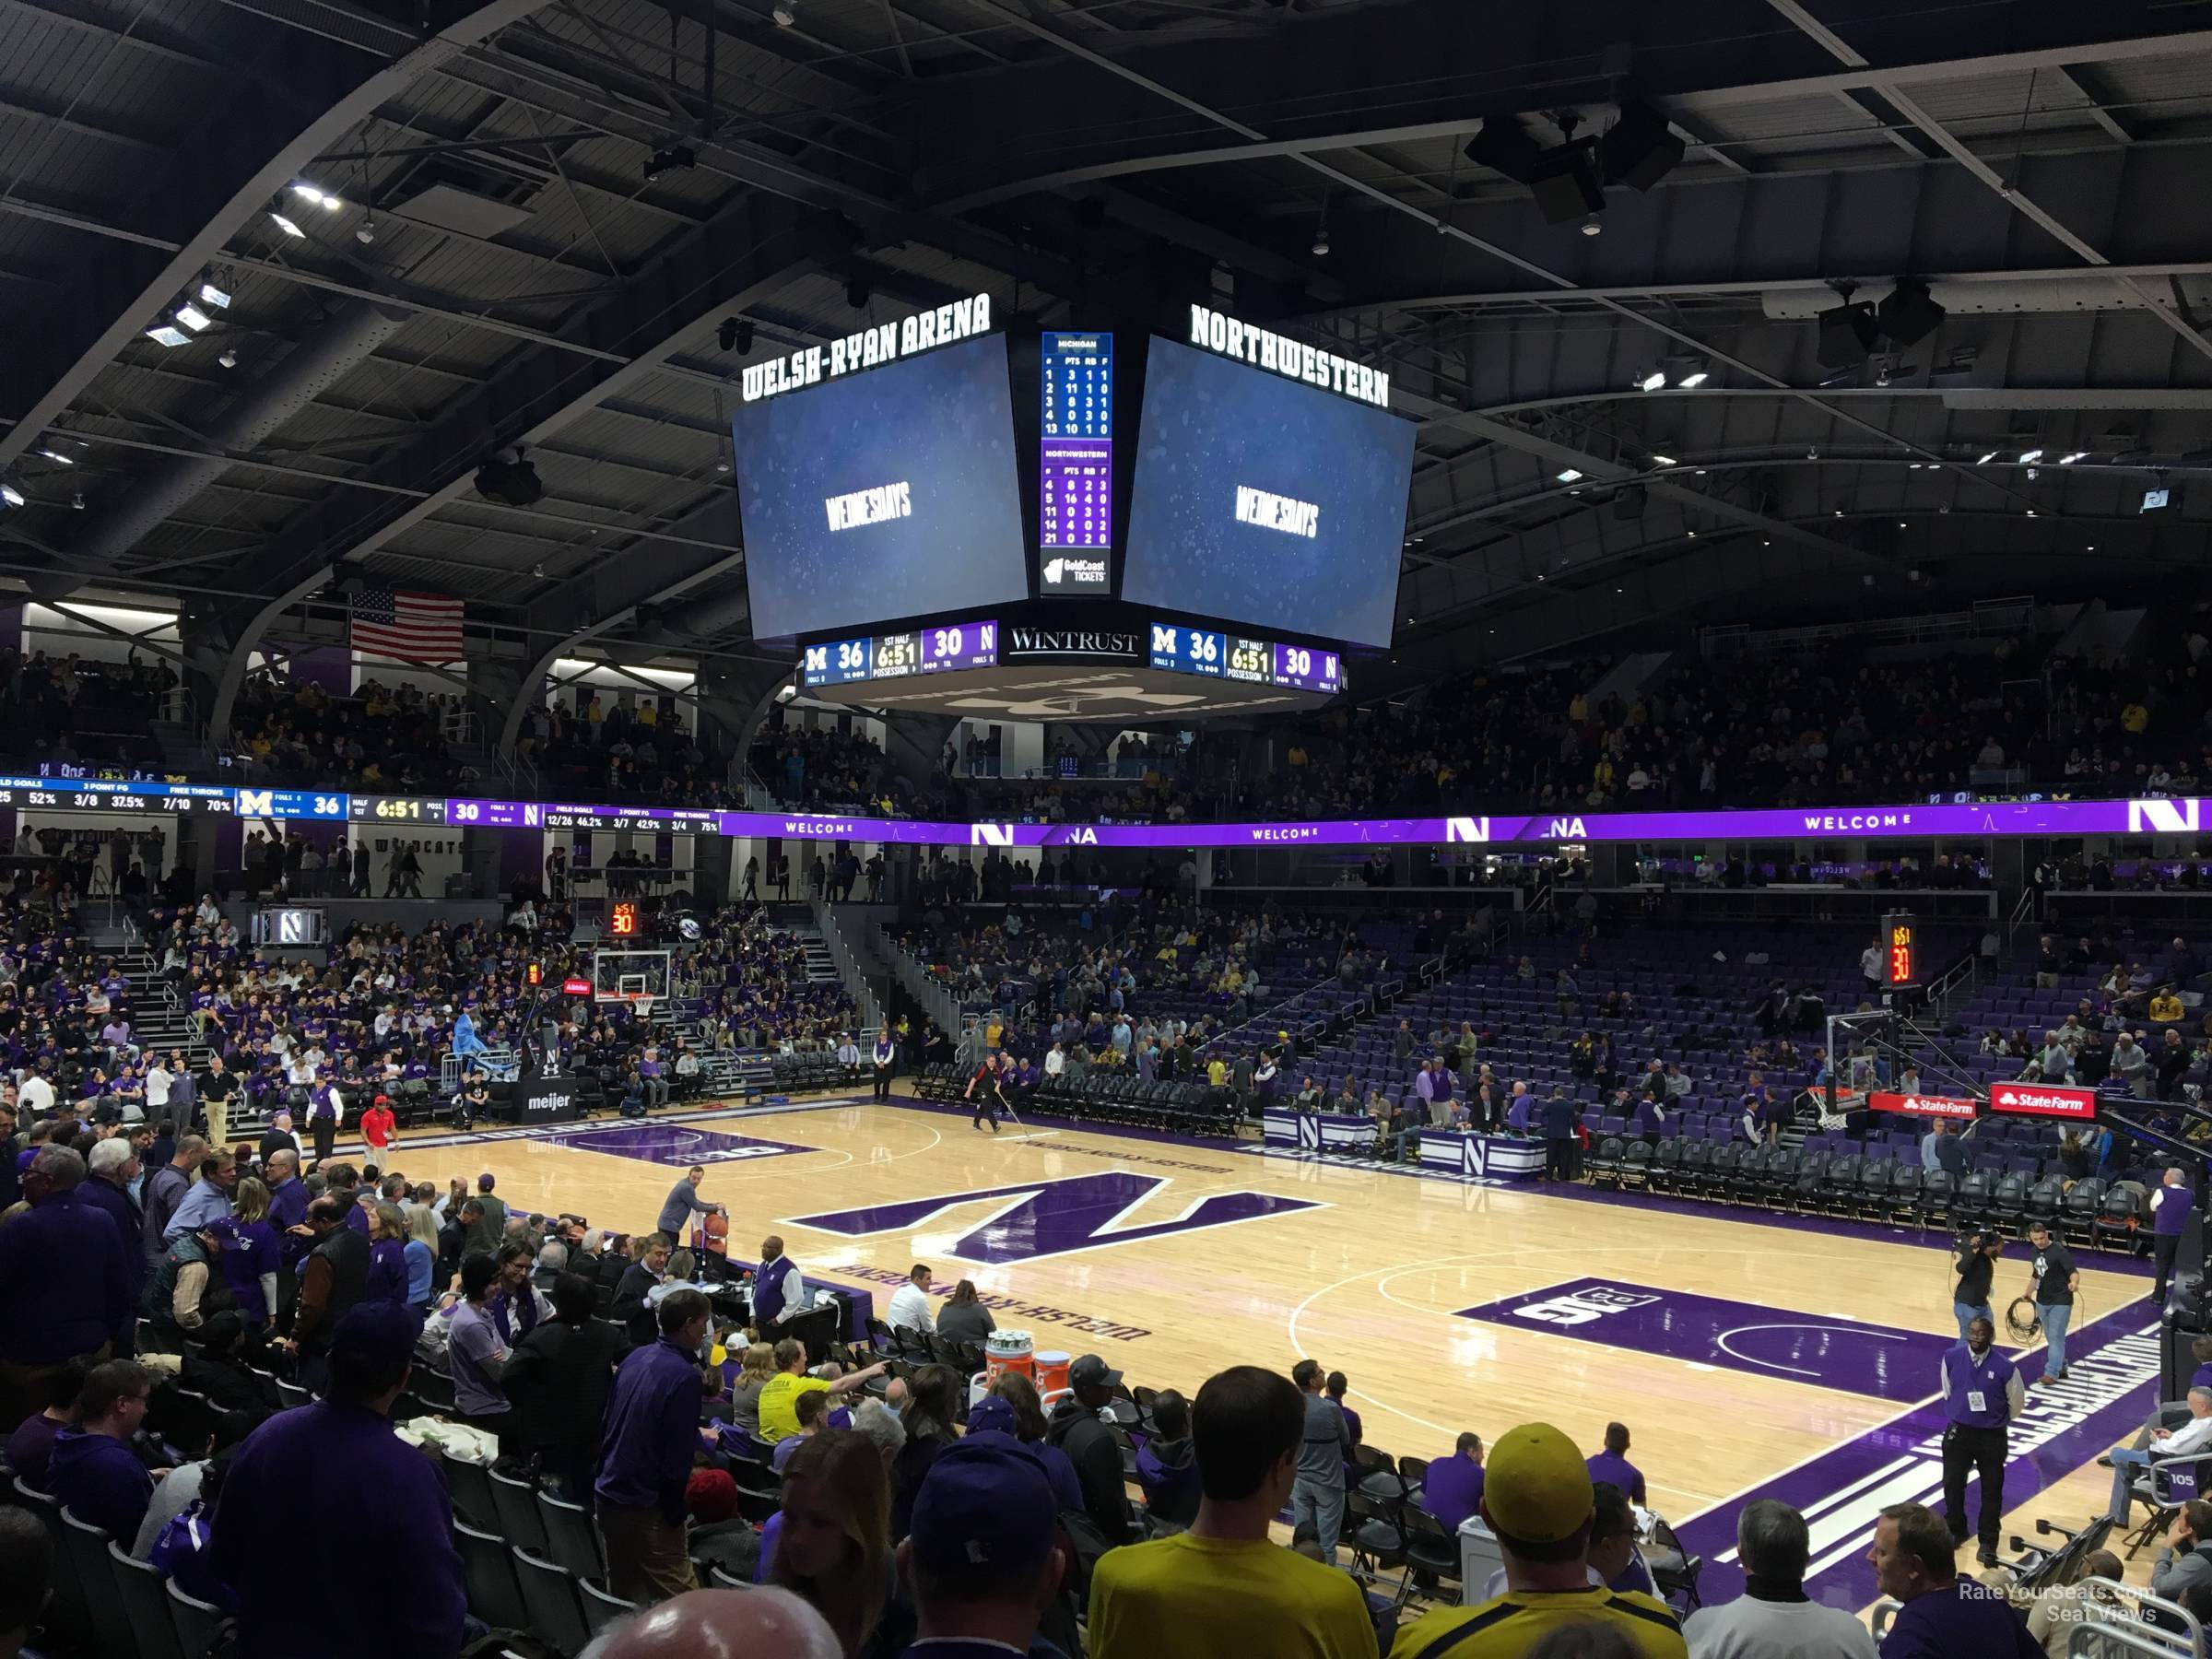 section 106, row 12 seat view  - welsh-ryan arena